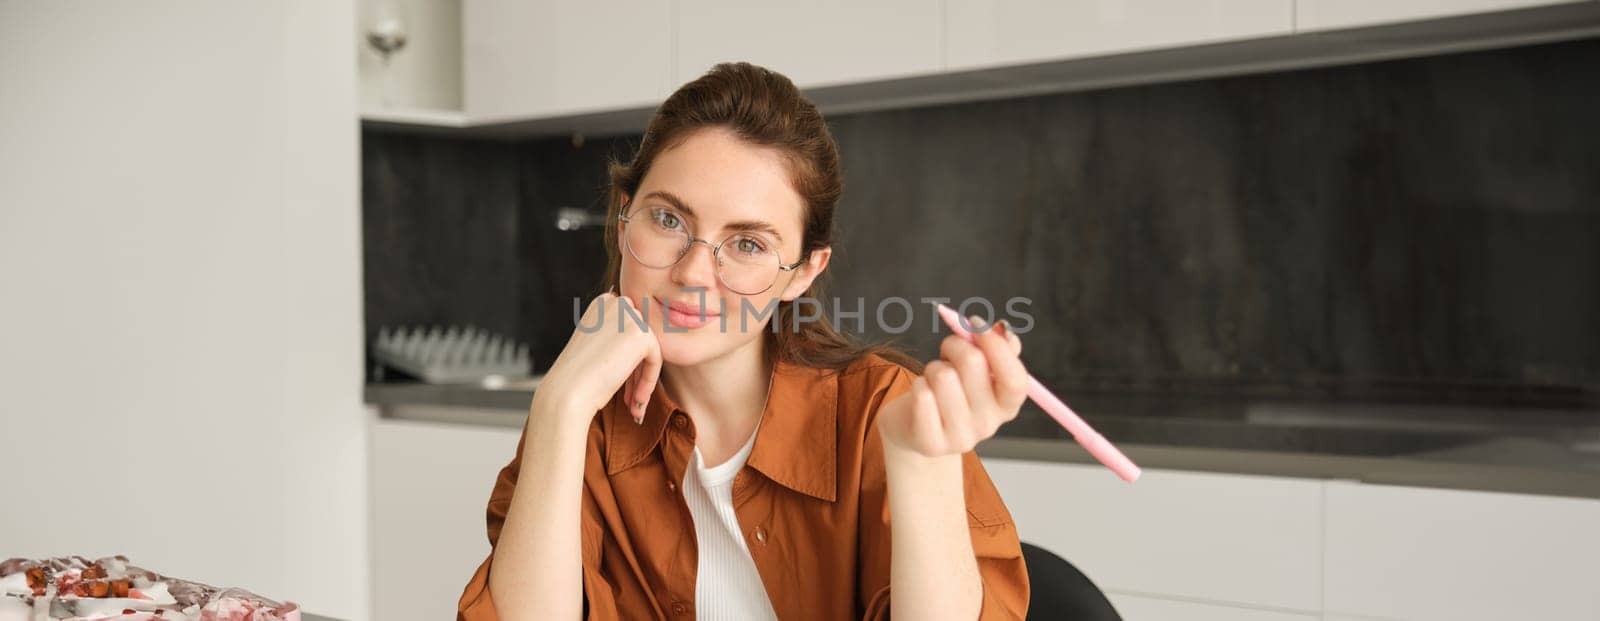 Close up portrait of smiling beautiful woman writing with pen, sitting in kitchen and doing homework, student studying, sitting in kitchen, wearing glasses.